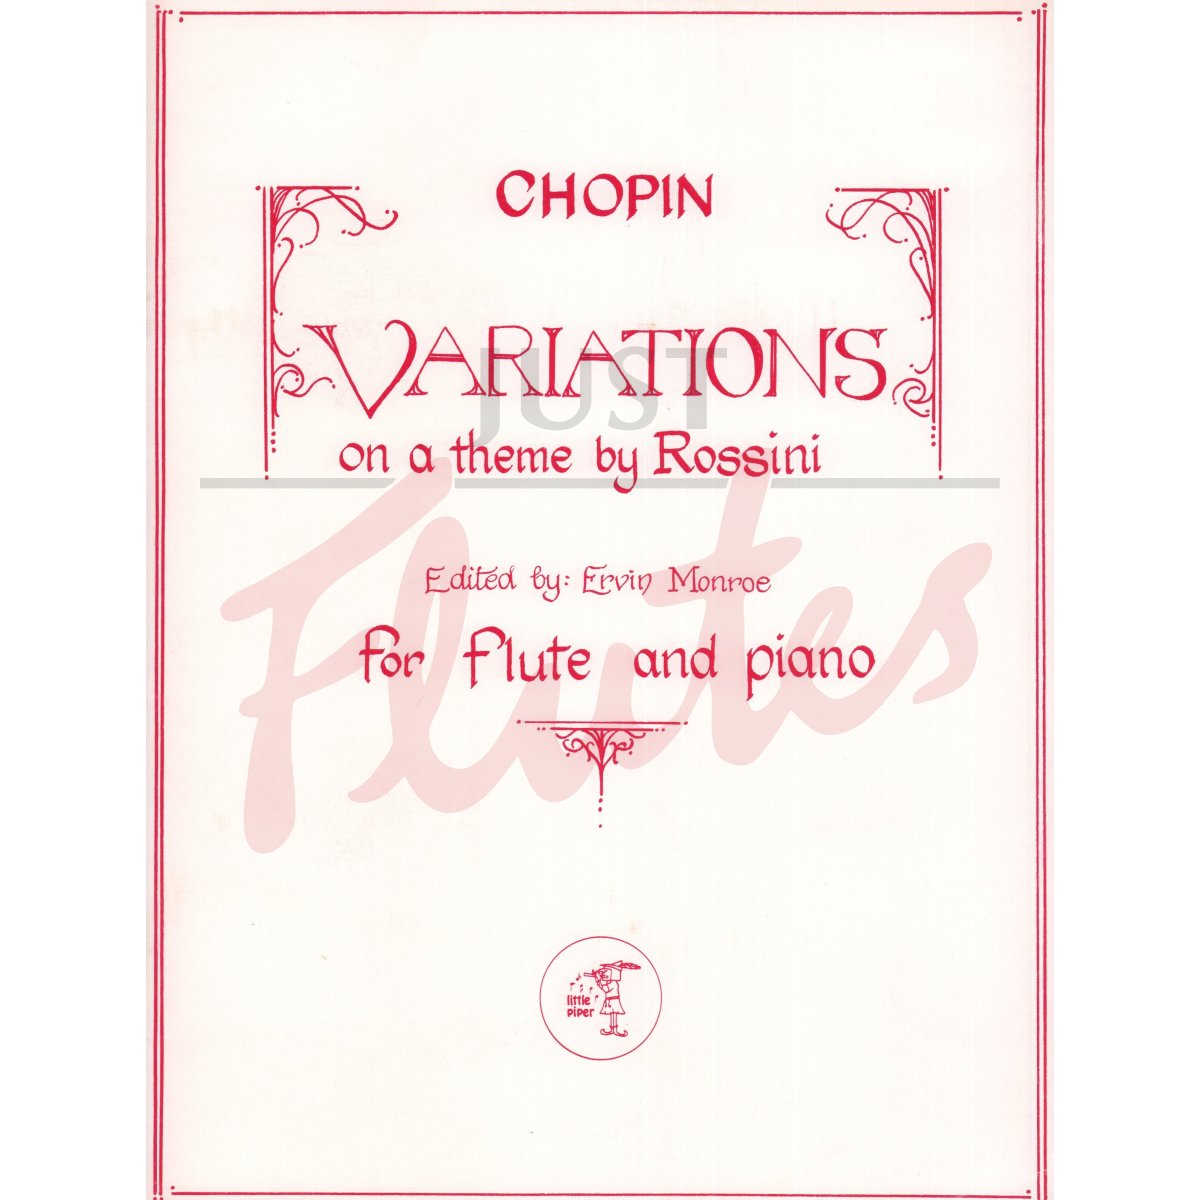 Variations on a Theme by Rossini for Flute and Piano